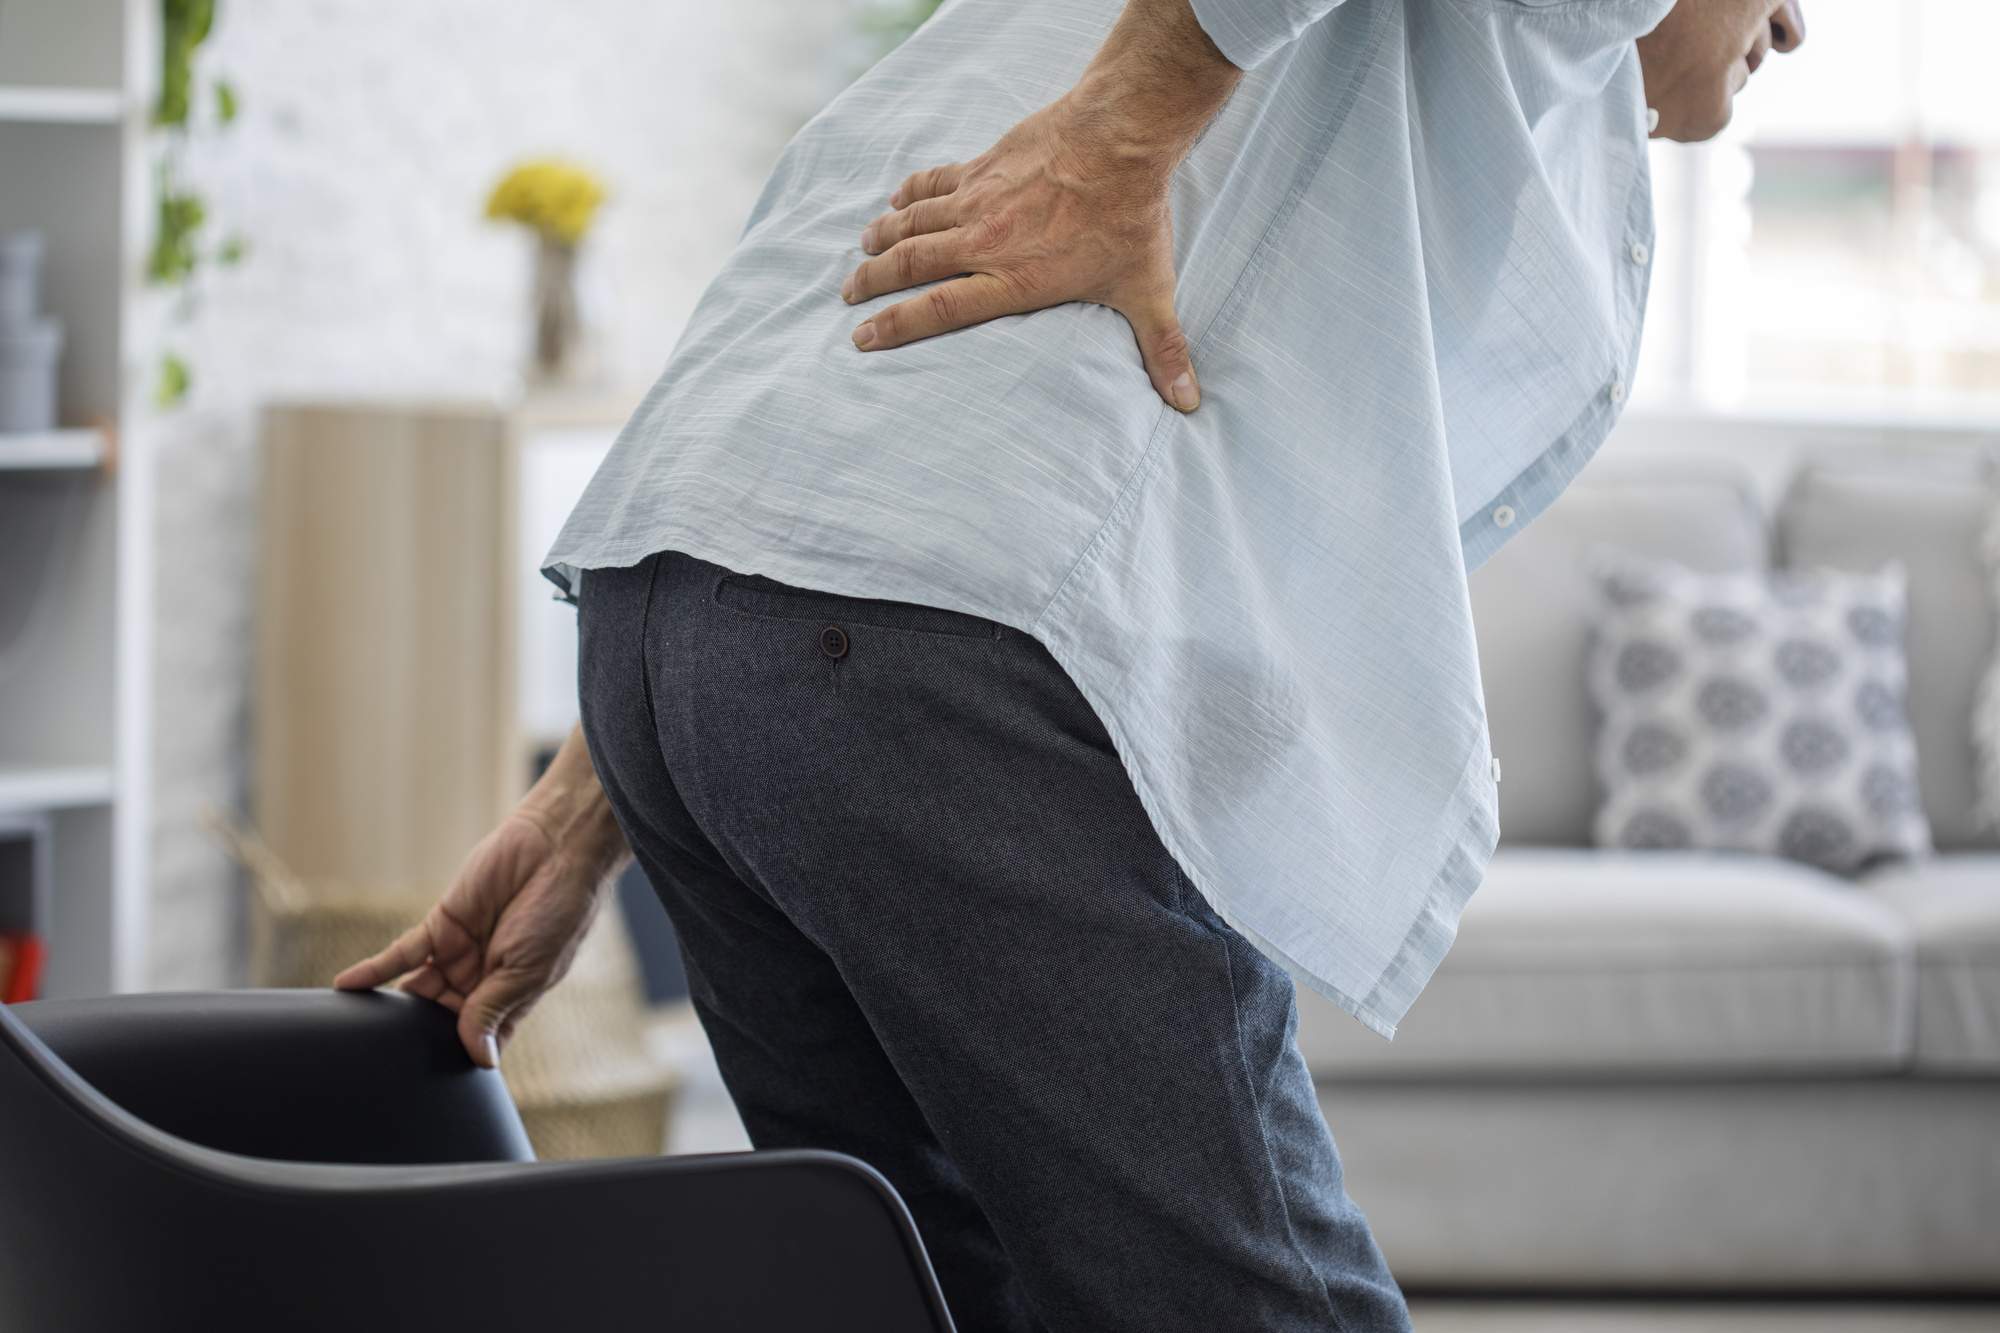 What Are Common Causes of Lower Back and Hip Pain?